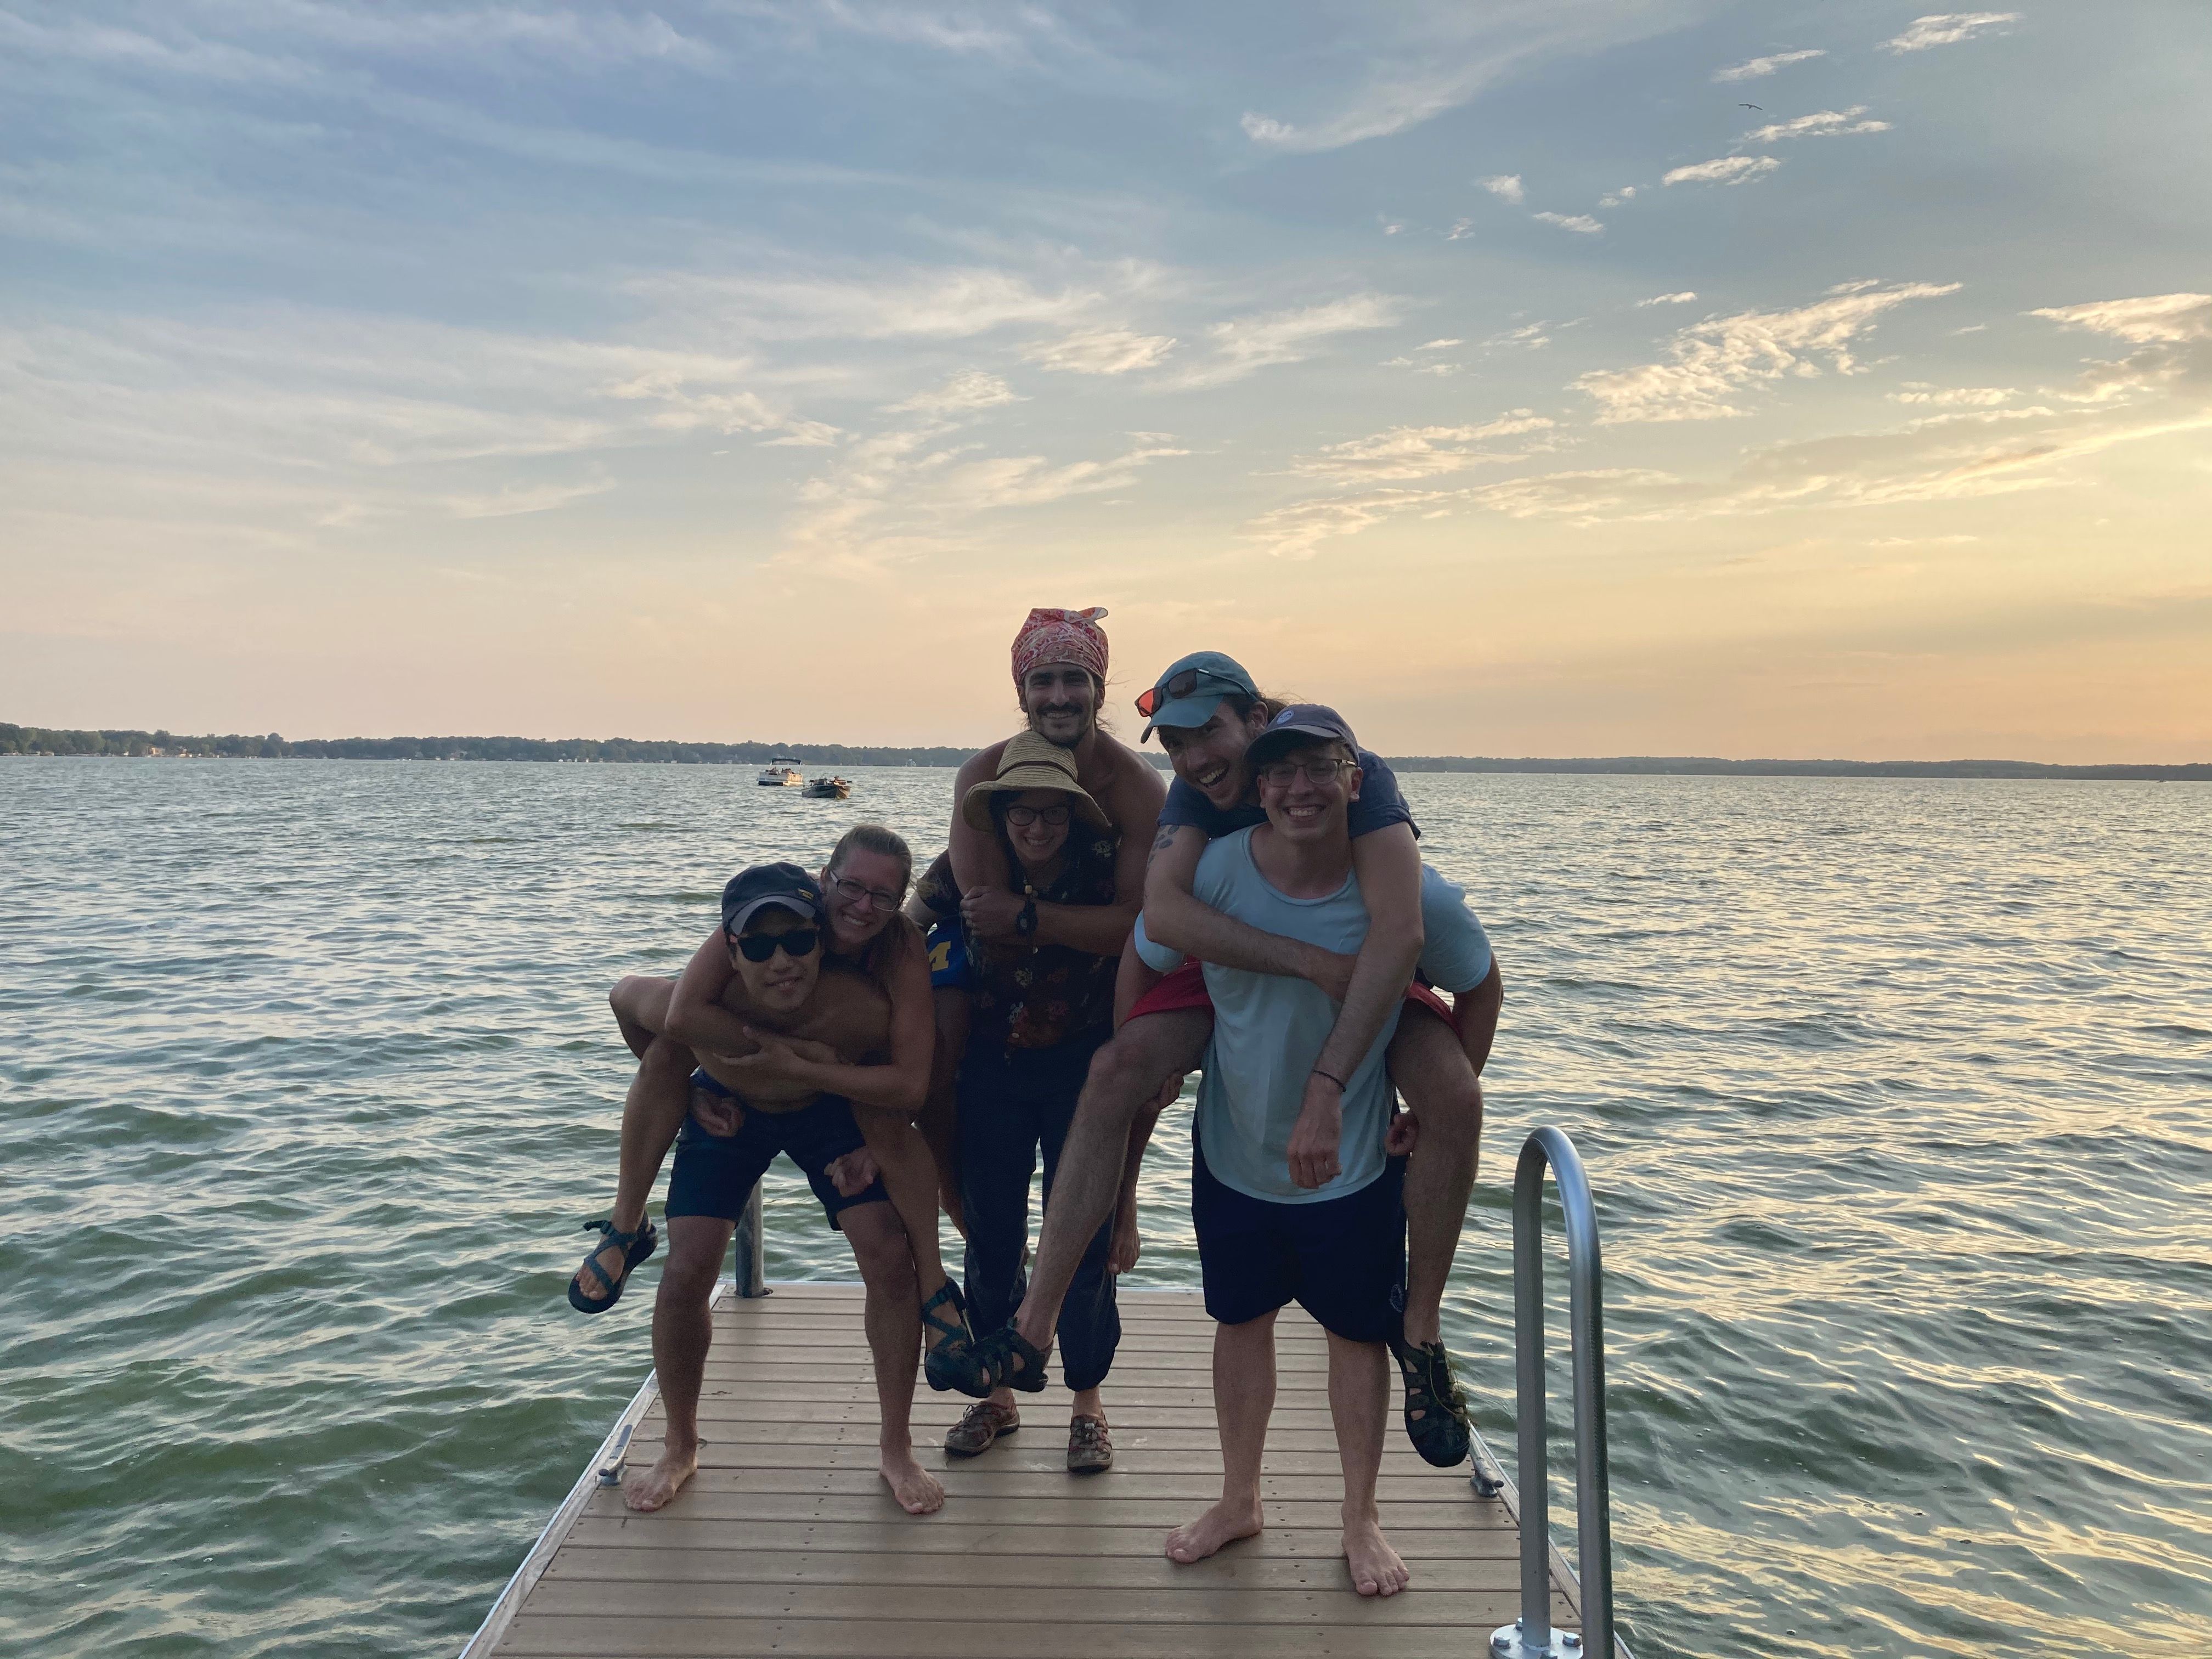 Six Summiteers pose victoriously after canoeing five lakes. Three people each posing with one person on their back. (Circa summer 2020)